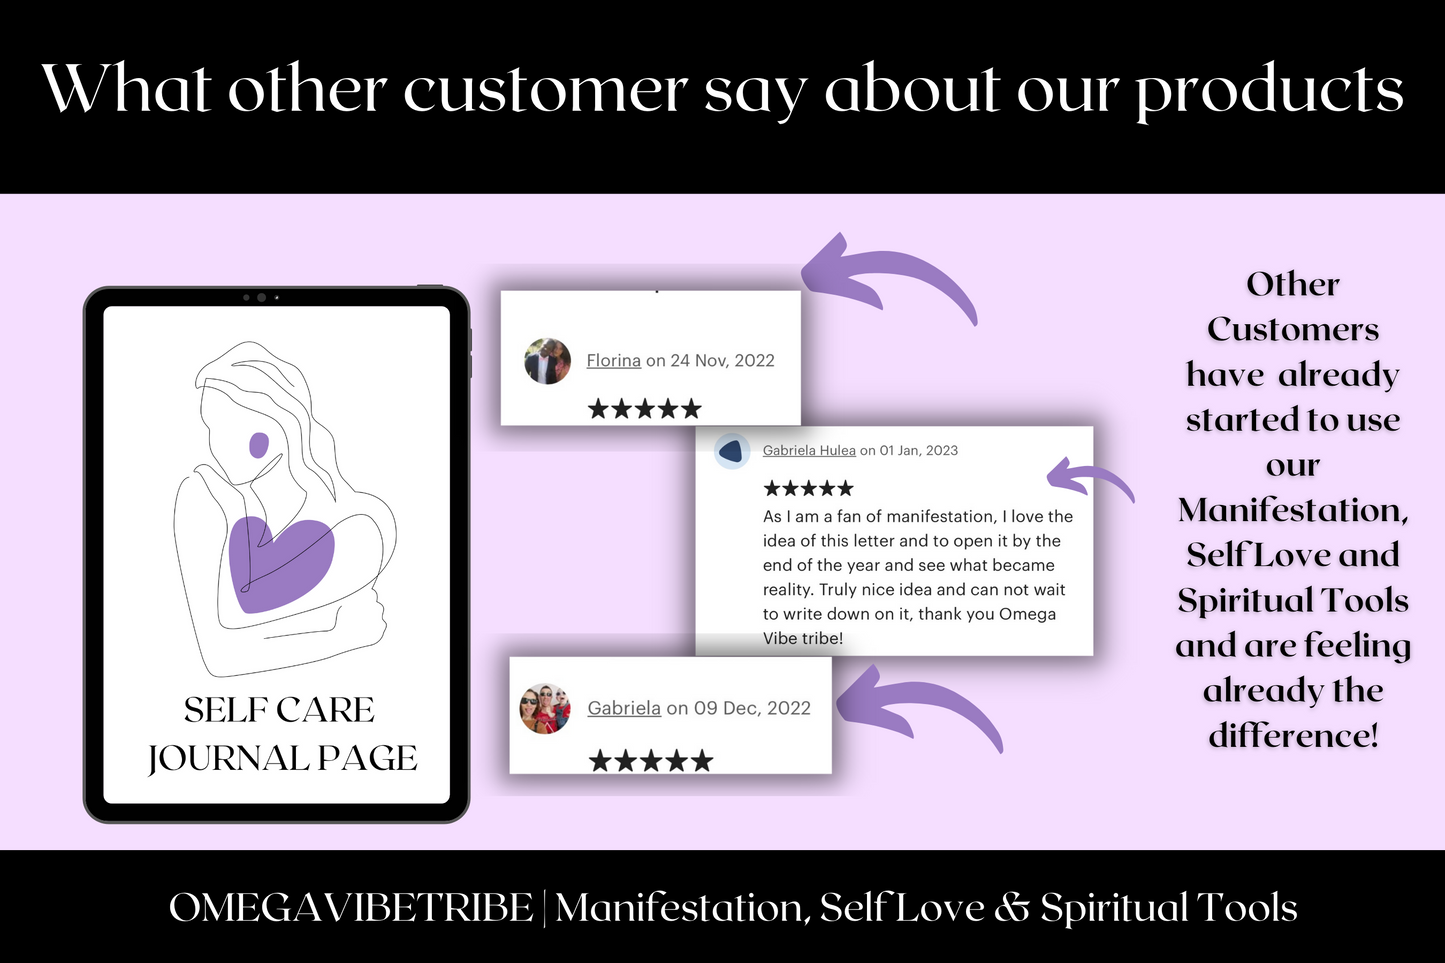 this page shows the 5 star reviews of the Omega Vibe Tribe customers